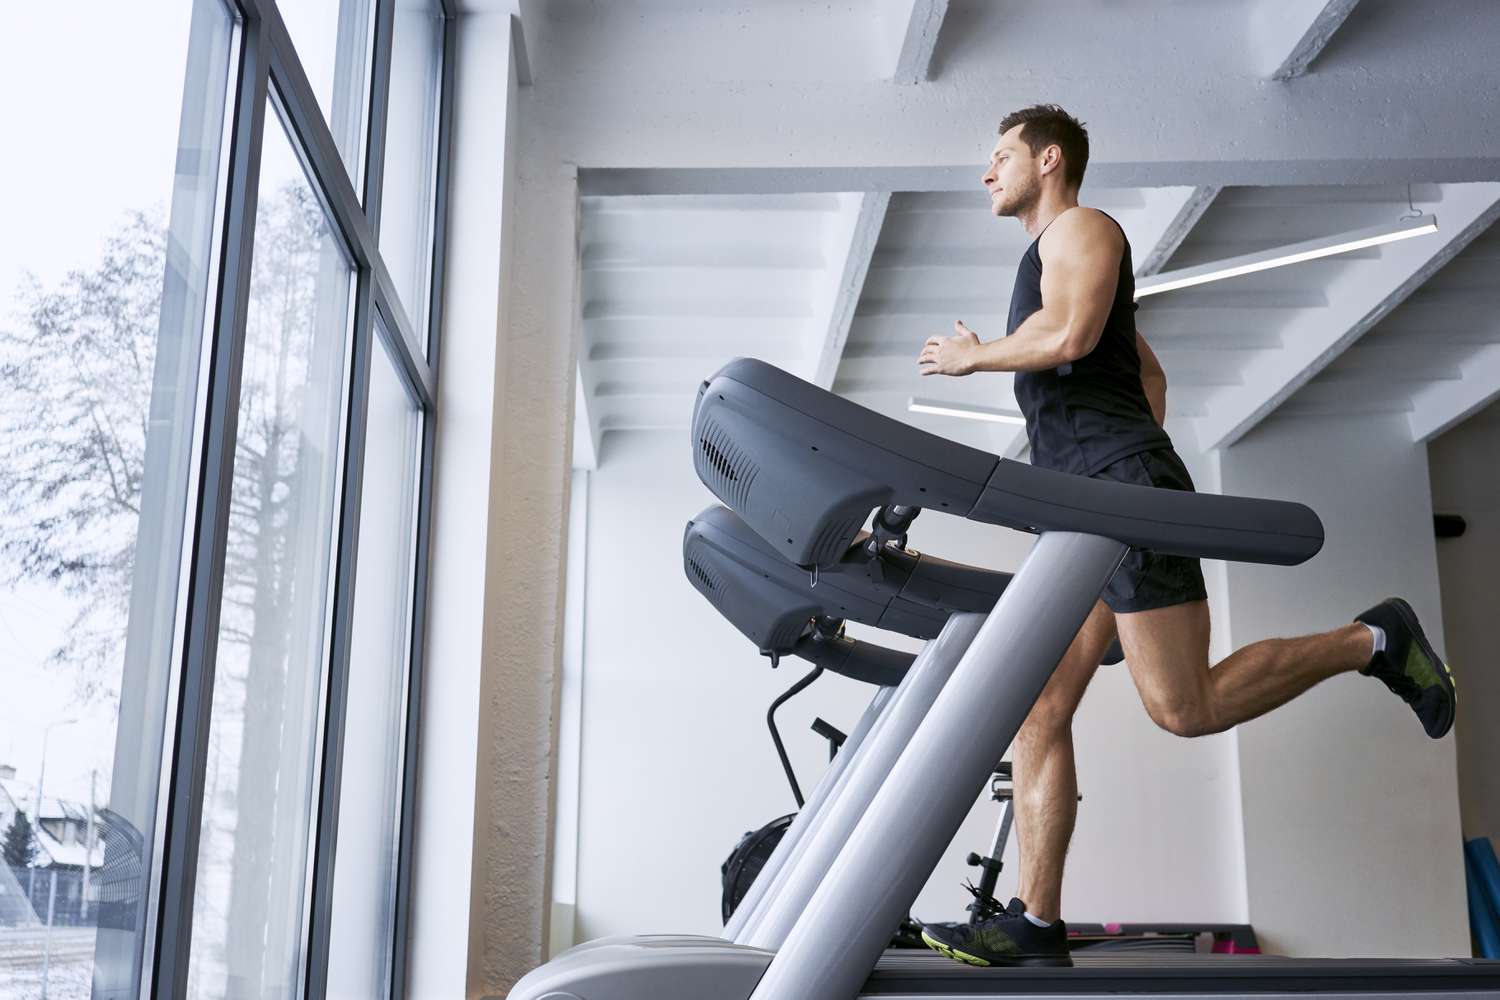 How Many Calories Do You Burn Through Interval Training On Treadmill